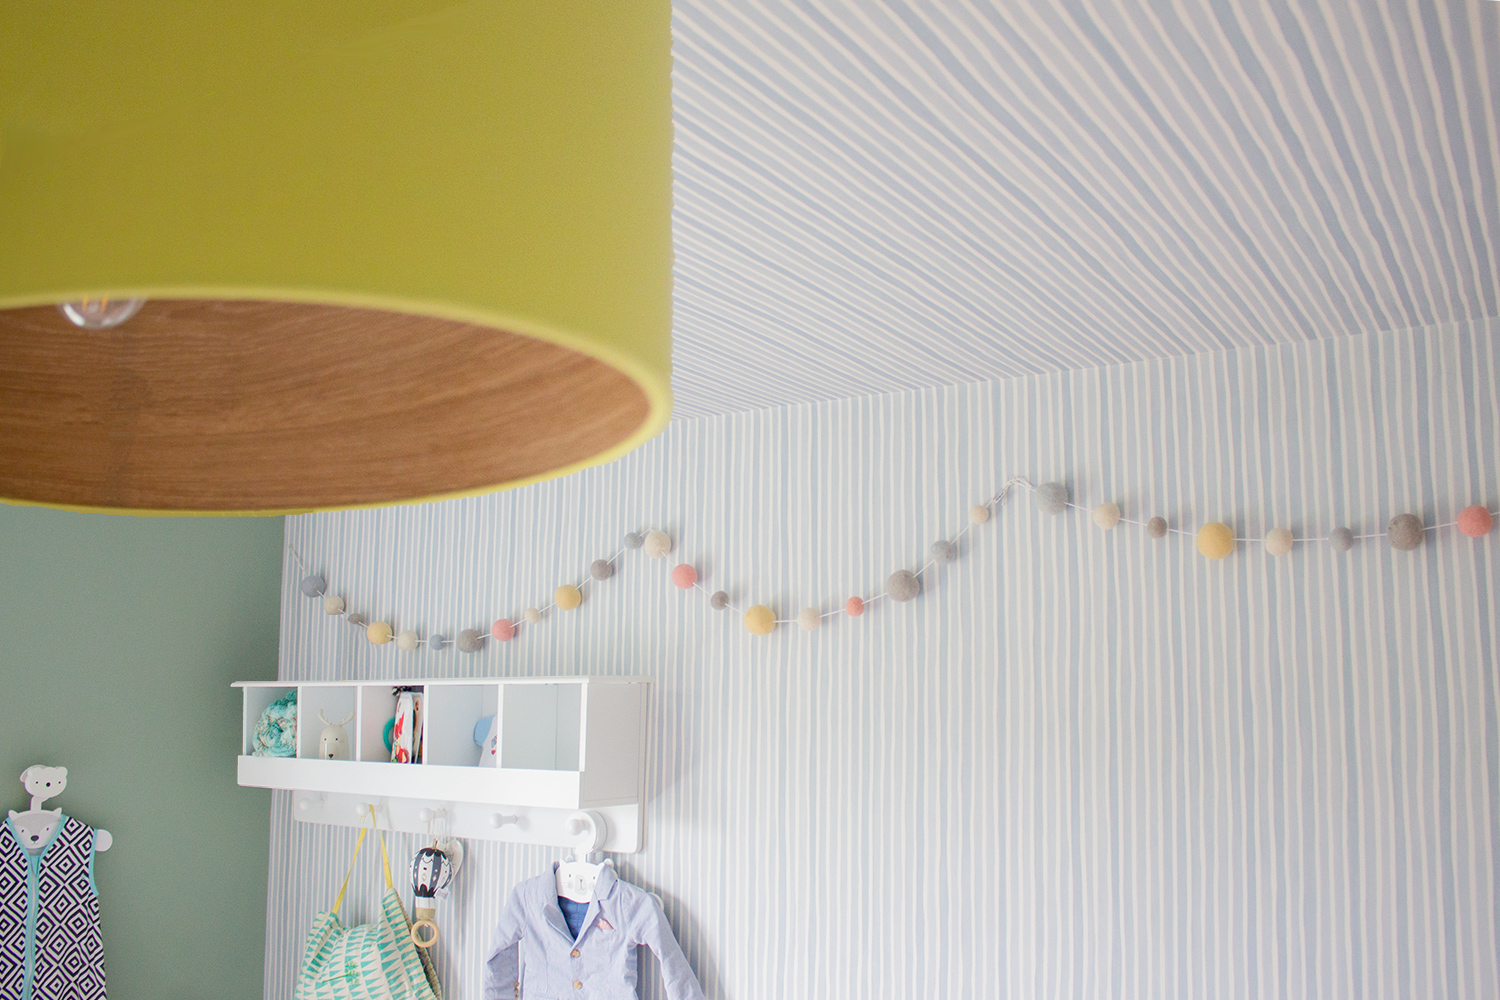 A photo of the subtly stripe wallpaper on the ceiling